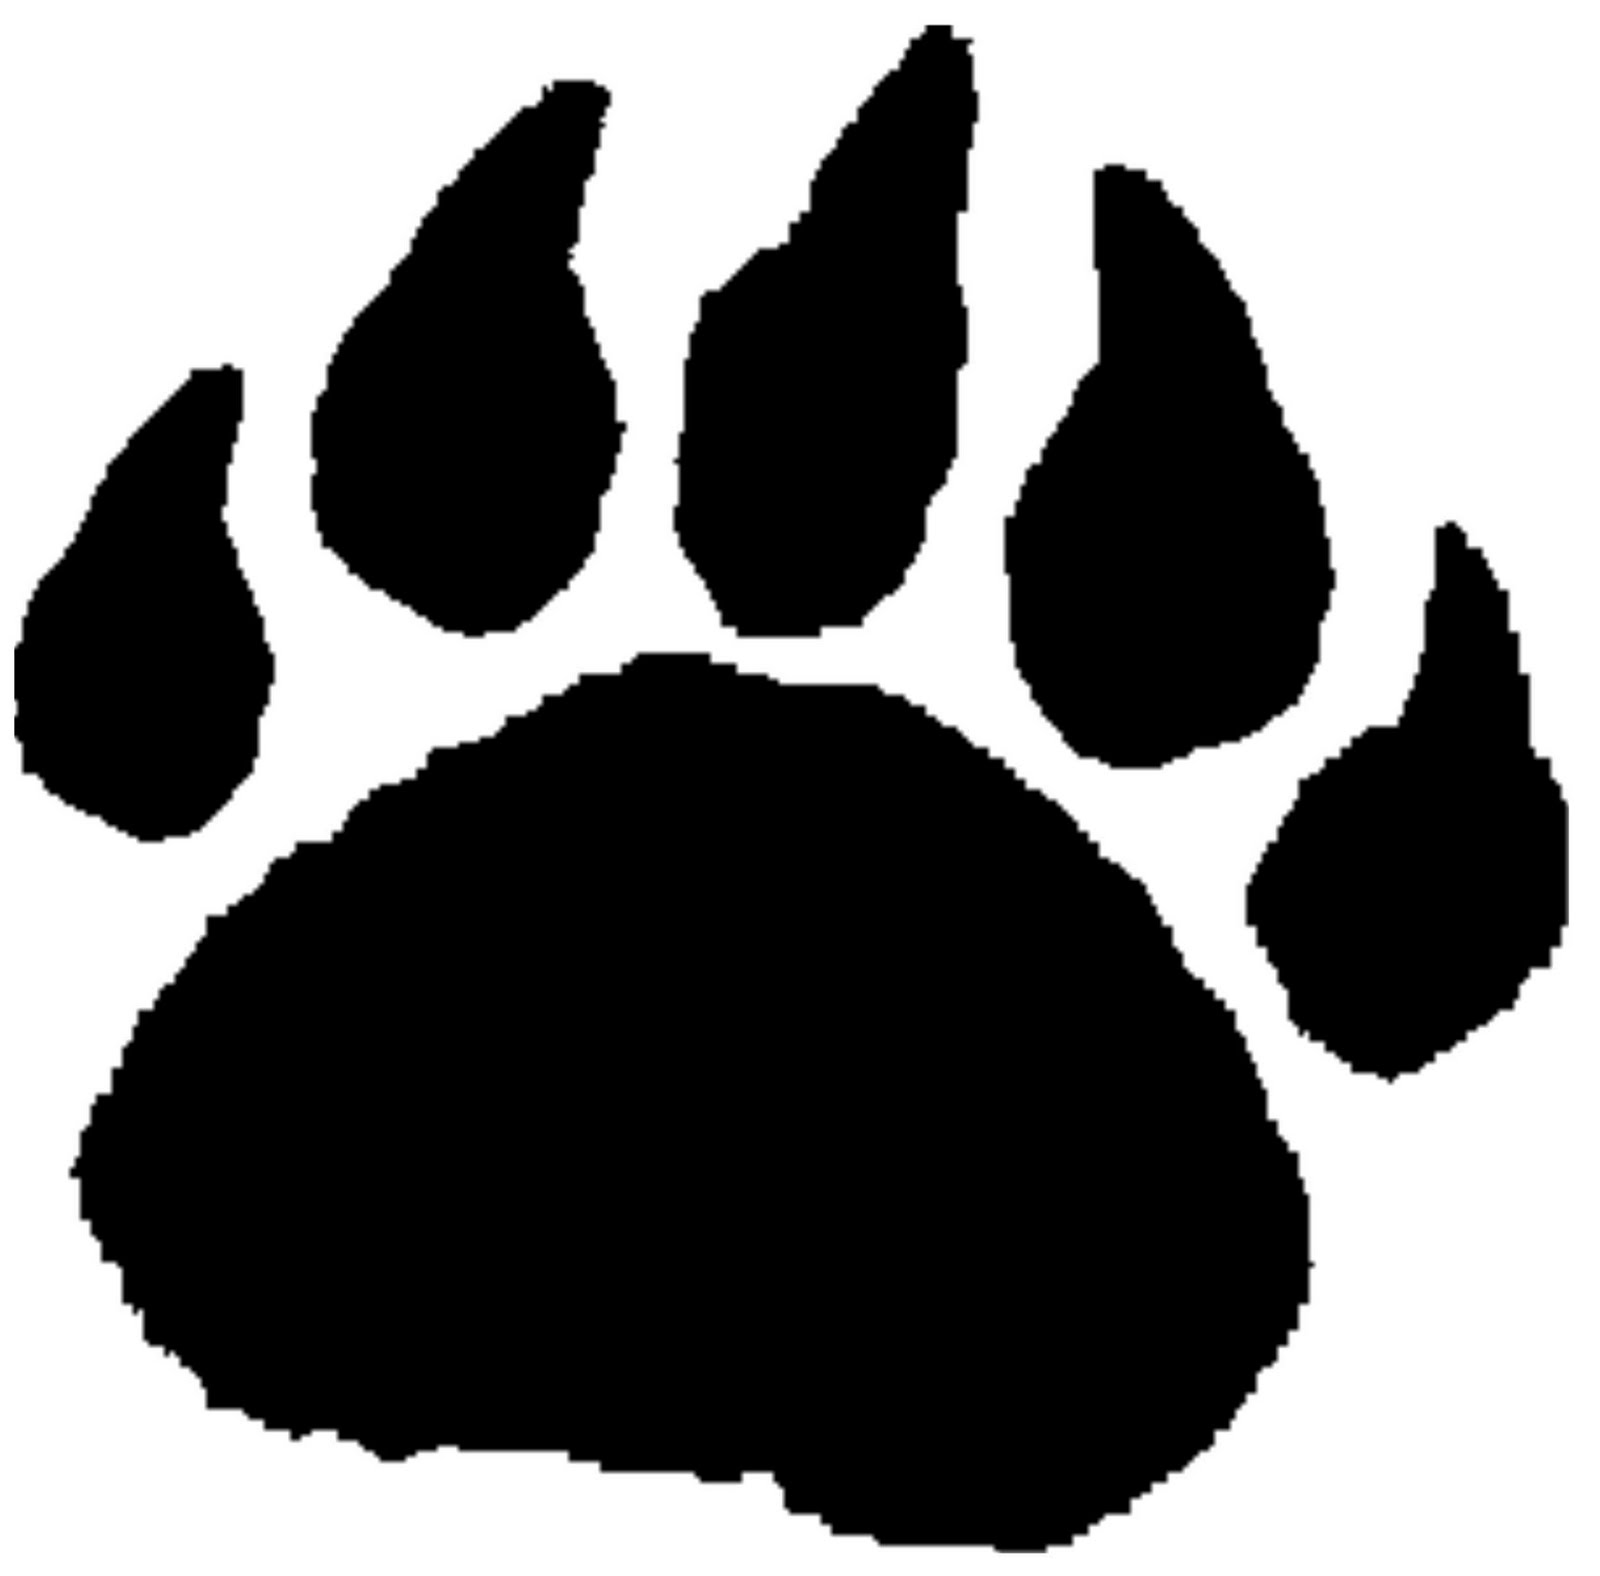 Bear claw grizzly bear paw print clipart free images 2